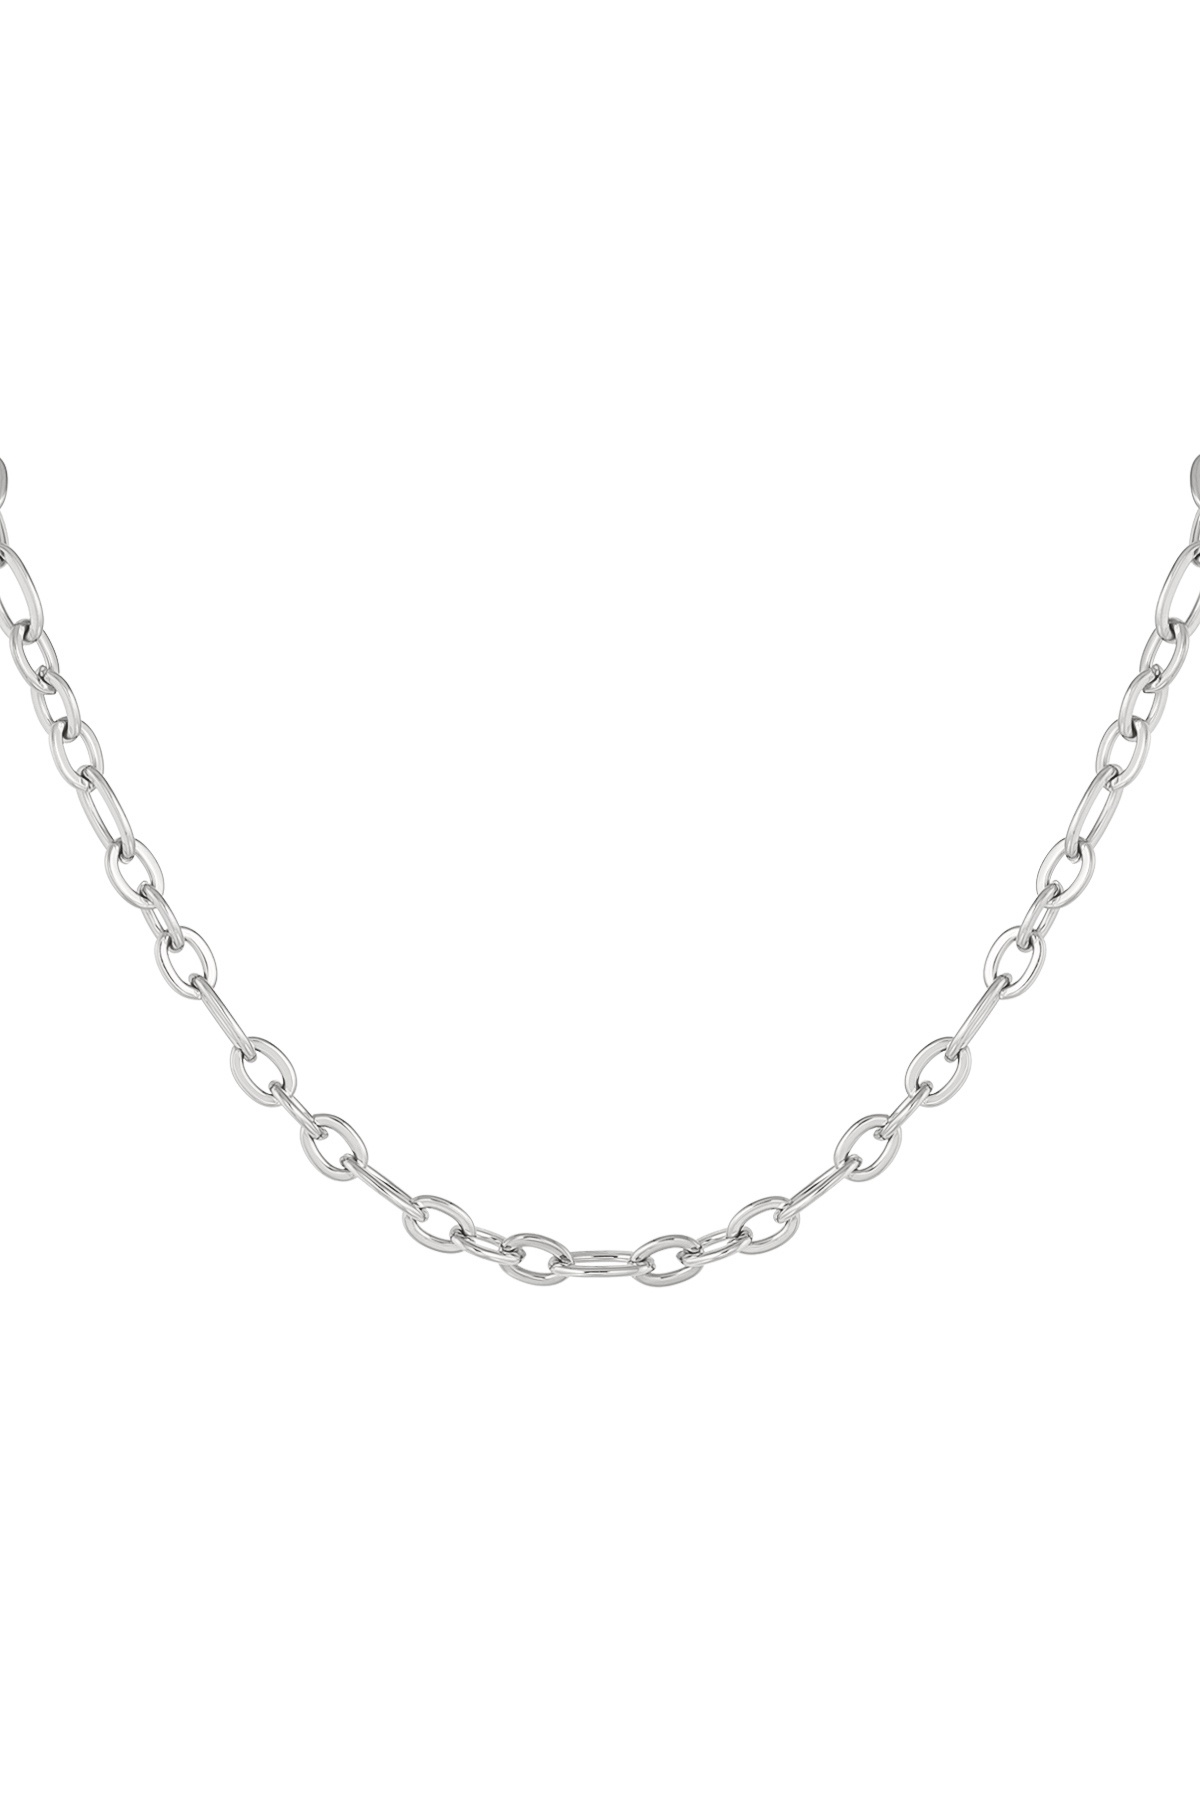 Chain basic link - silver